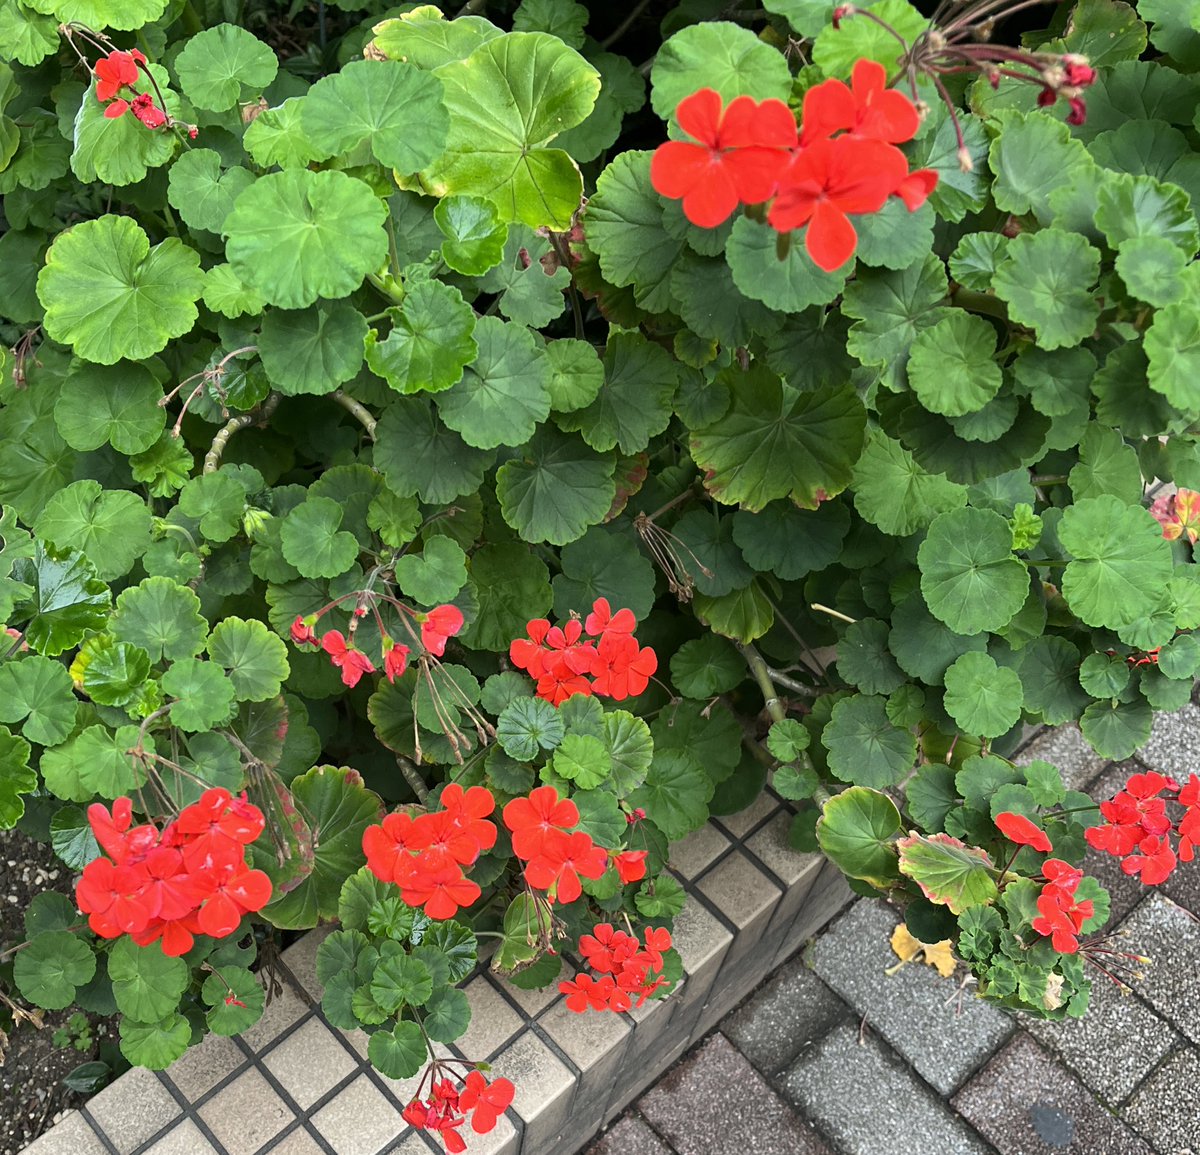 #STEPN June 23, 2023.
Opened #MB7 in #aperealm 🎁

Good morning😄
Small flowers blooming in Tokyo🌺